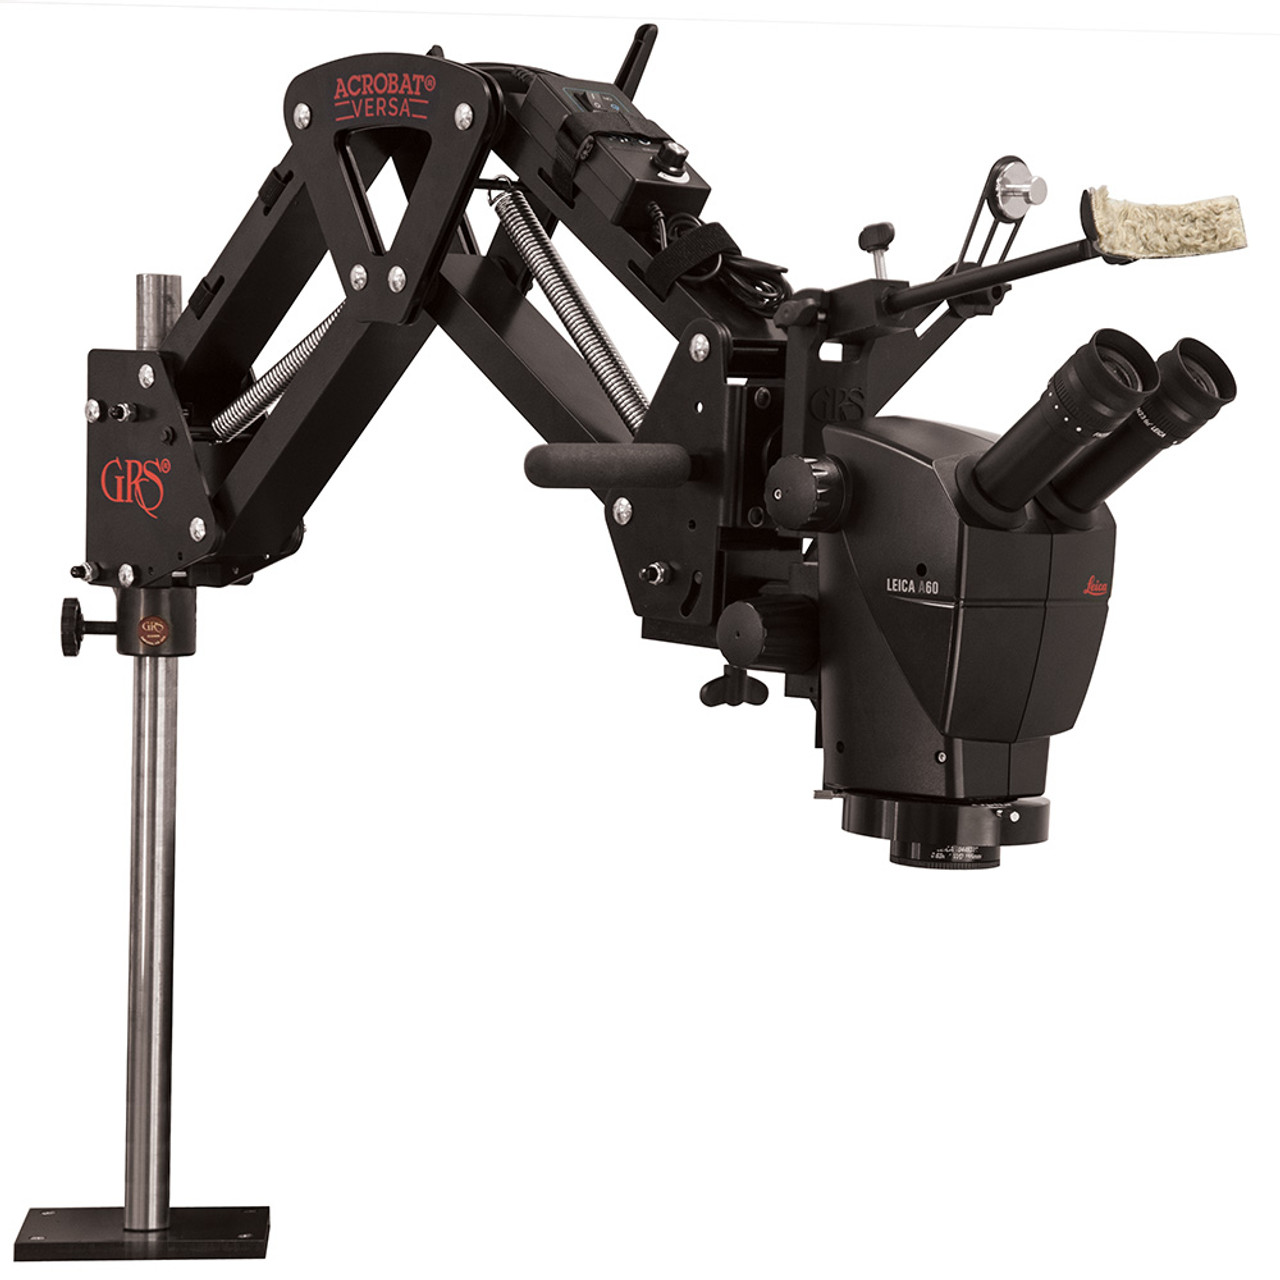 Leica® A60 Microscope with GRS® Acrobat Stand